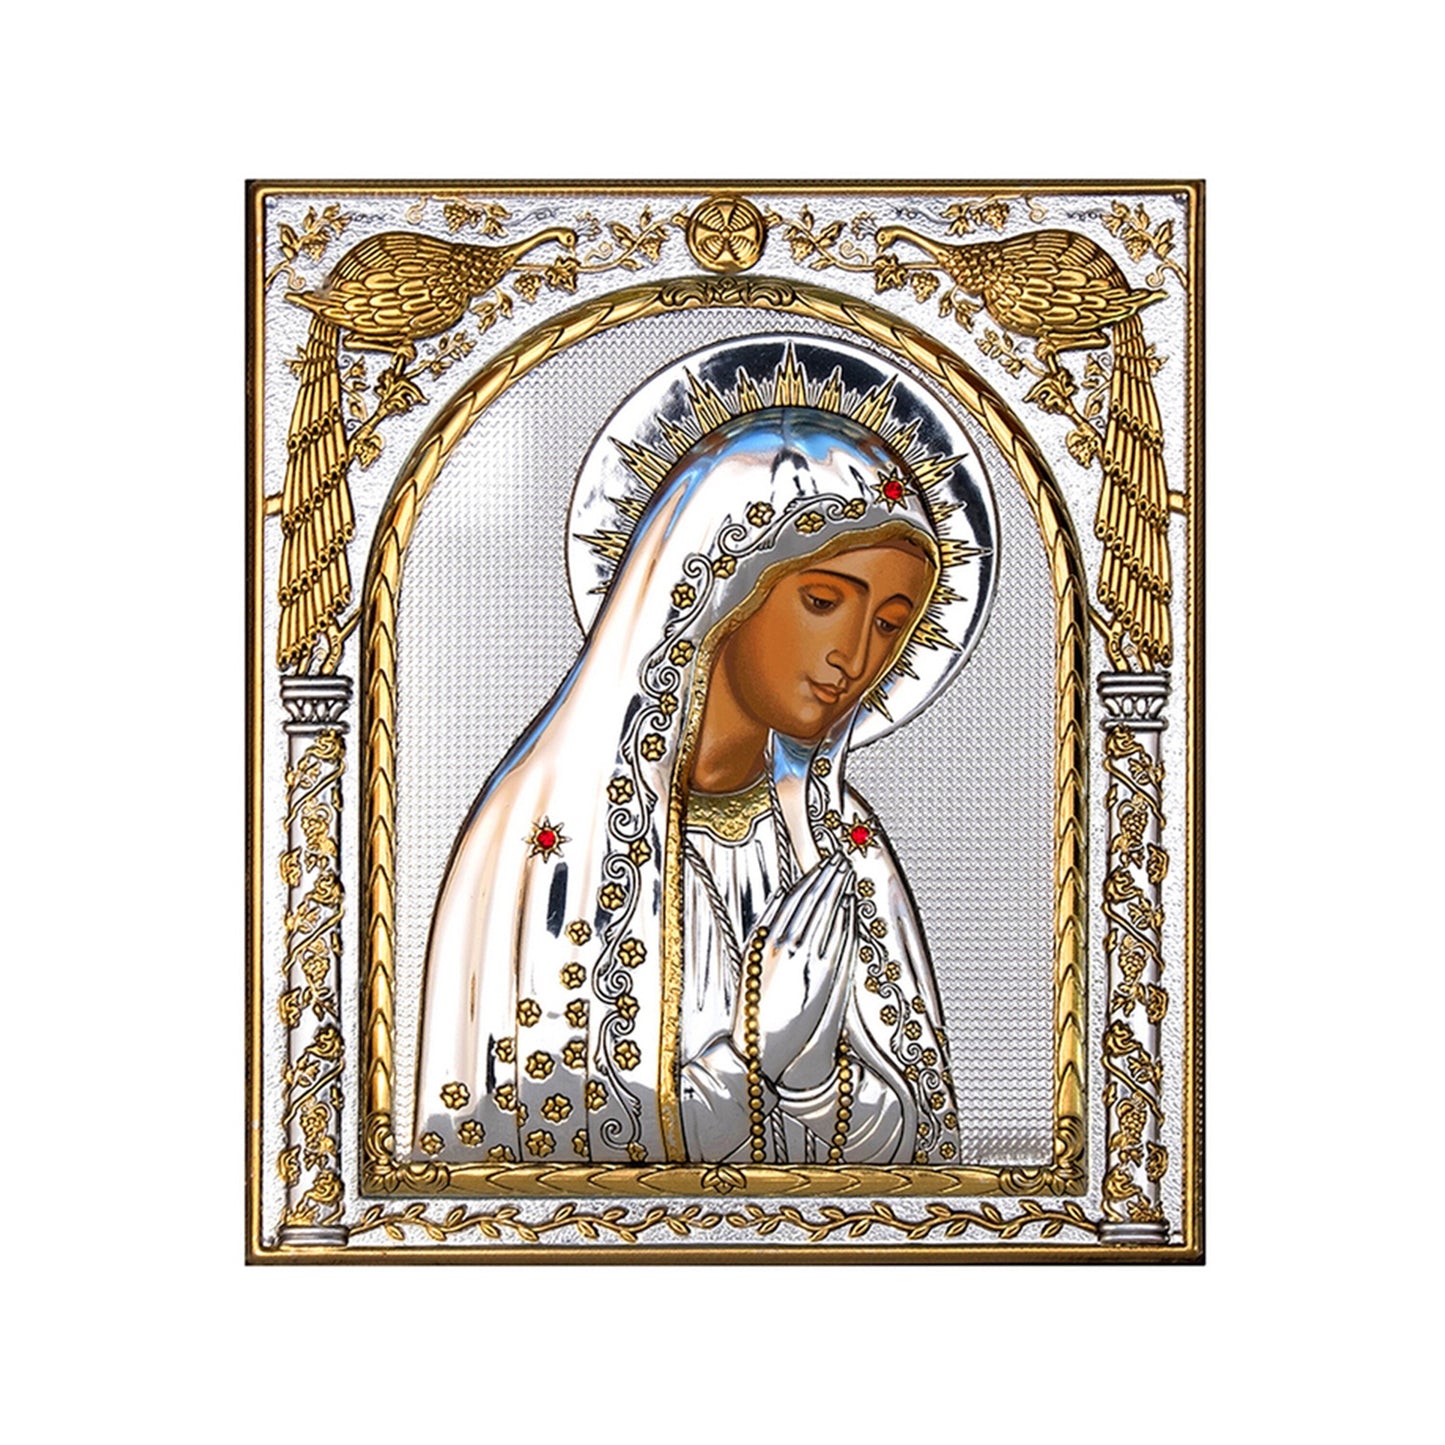 Virgin Mary icon Panagia Praying, Handmade Silver 999 Greek Orthodox icon, Byzantine art wall hanging on wood plaque religious icon gift